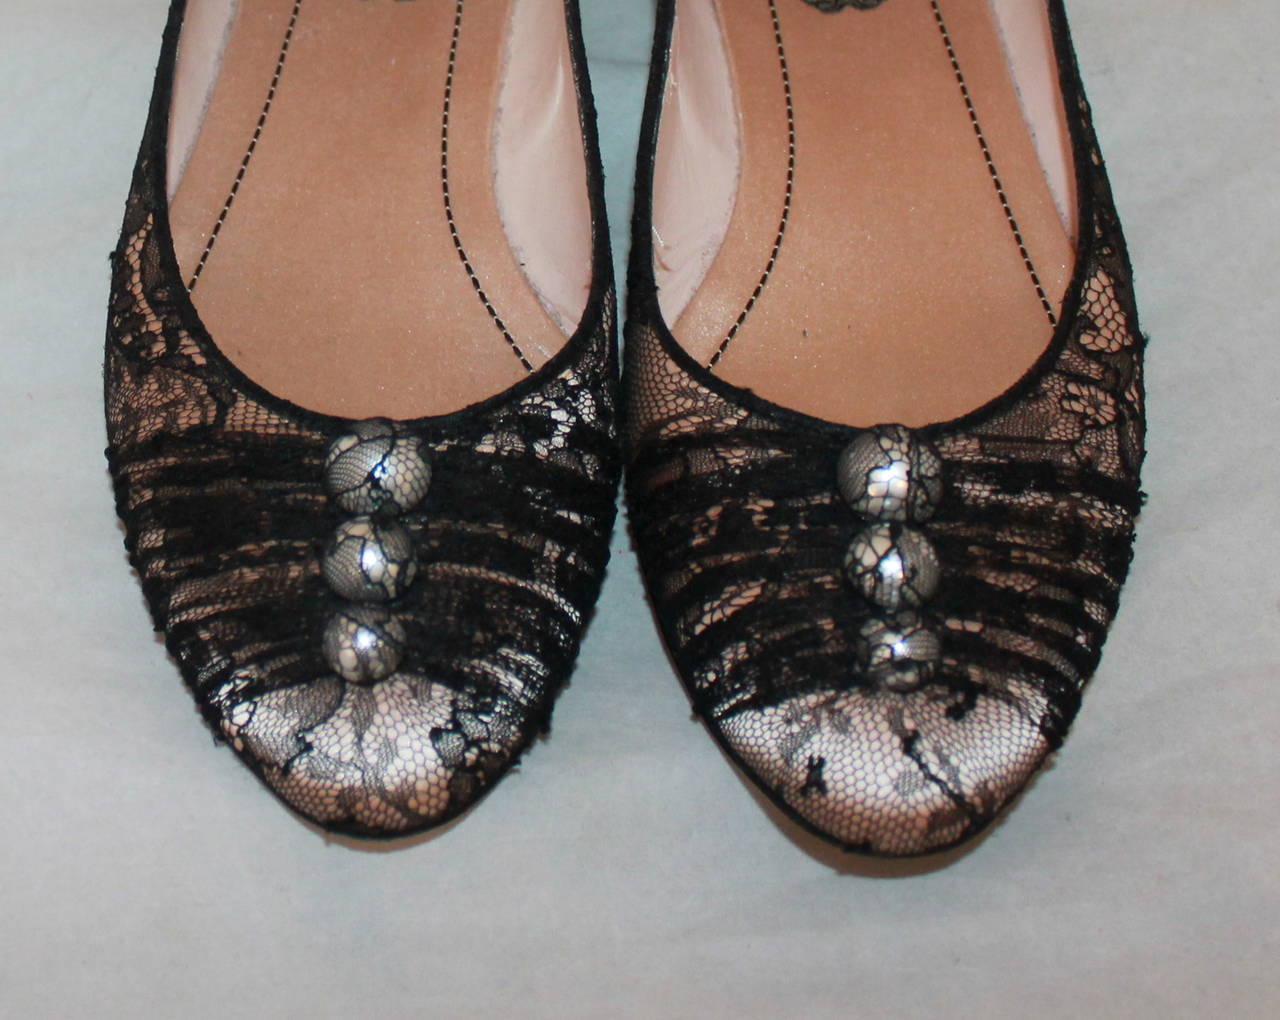 Rene Caovilla Pale Pink & Black Lace Flats with Pearls - 37. These shoes are in very good condition with wear on the bottom. Other than that, these shoes do not have markings.